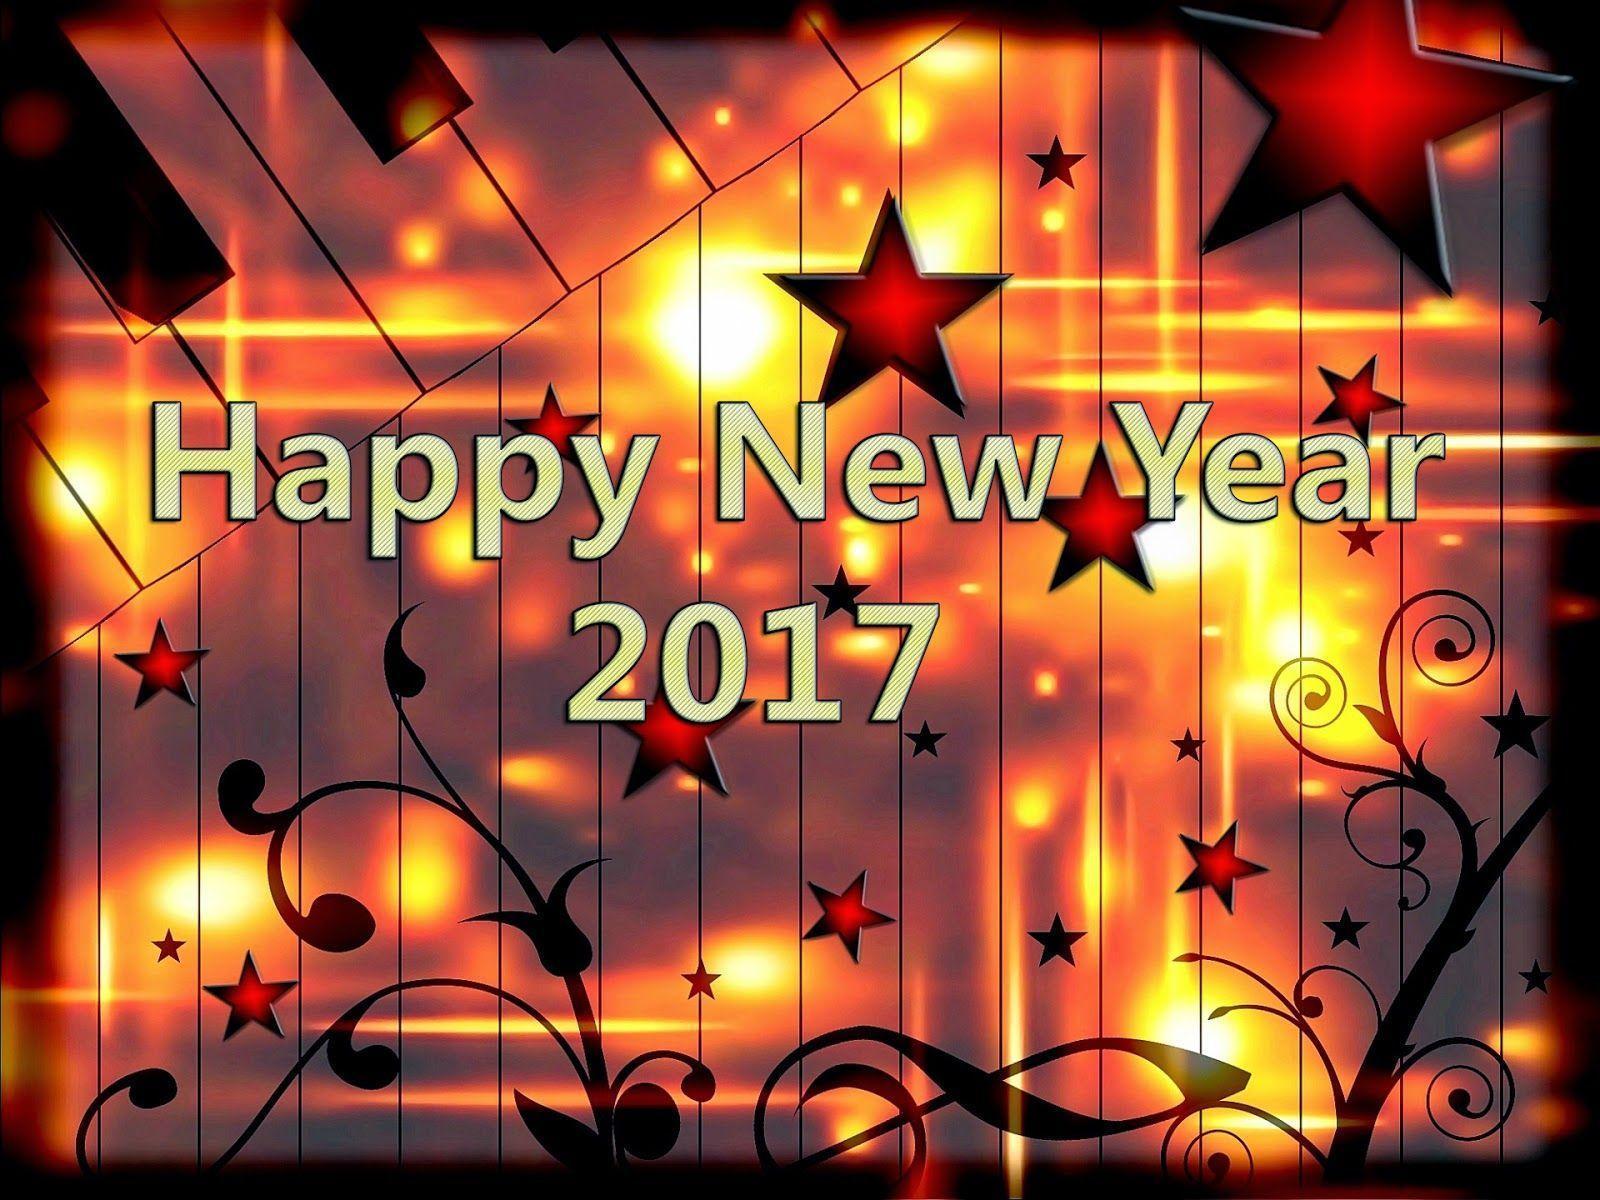 Happy New Year 2017 Wallpaper HD Image Picture 2017 Download